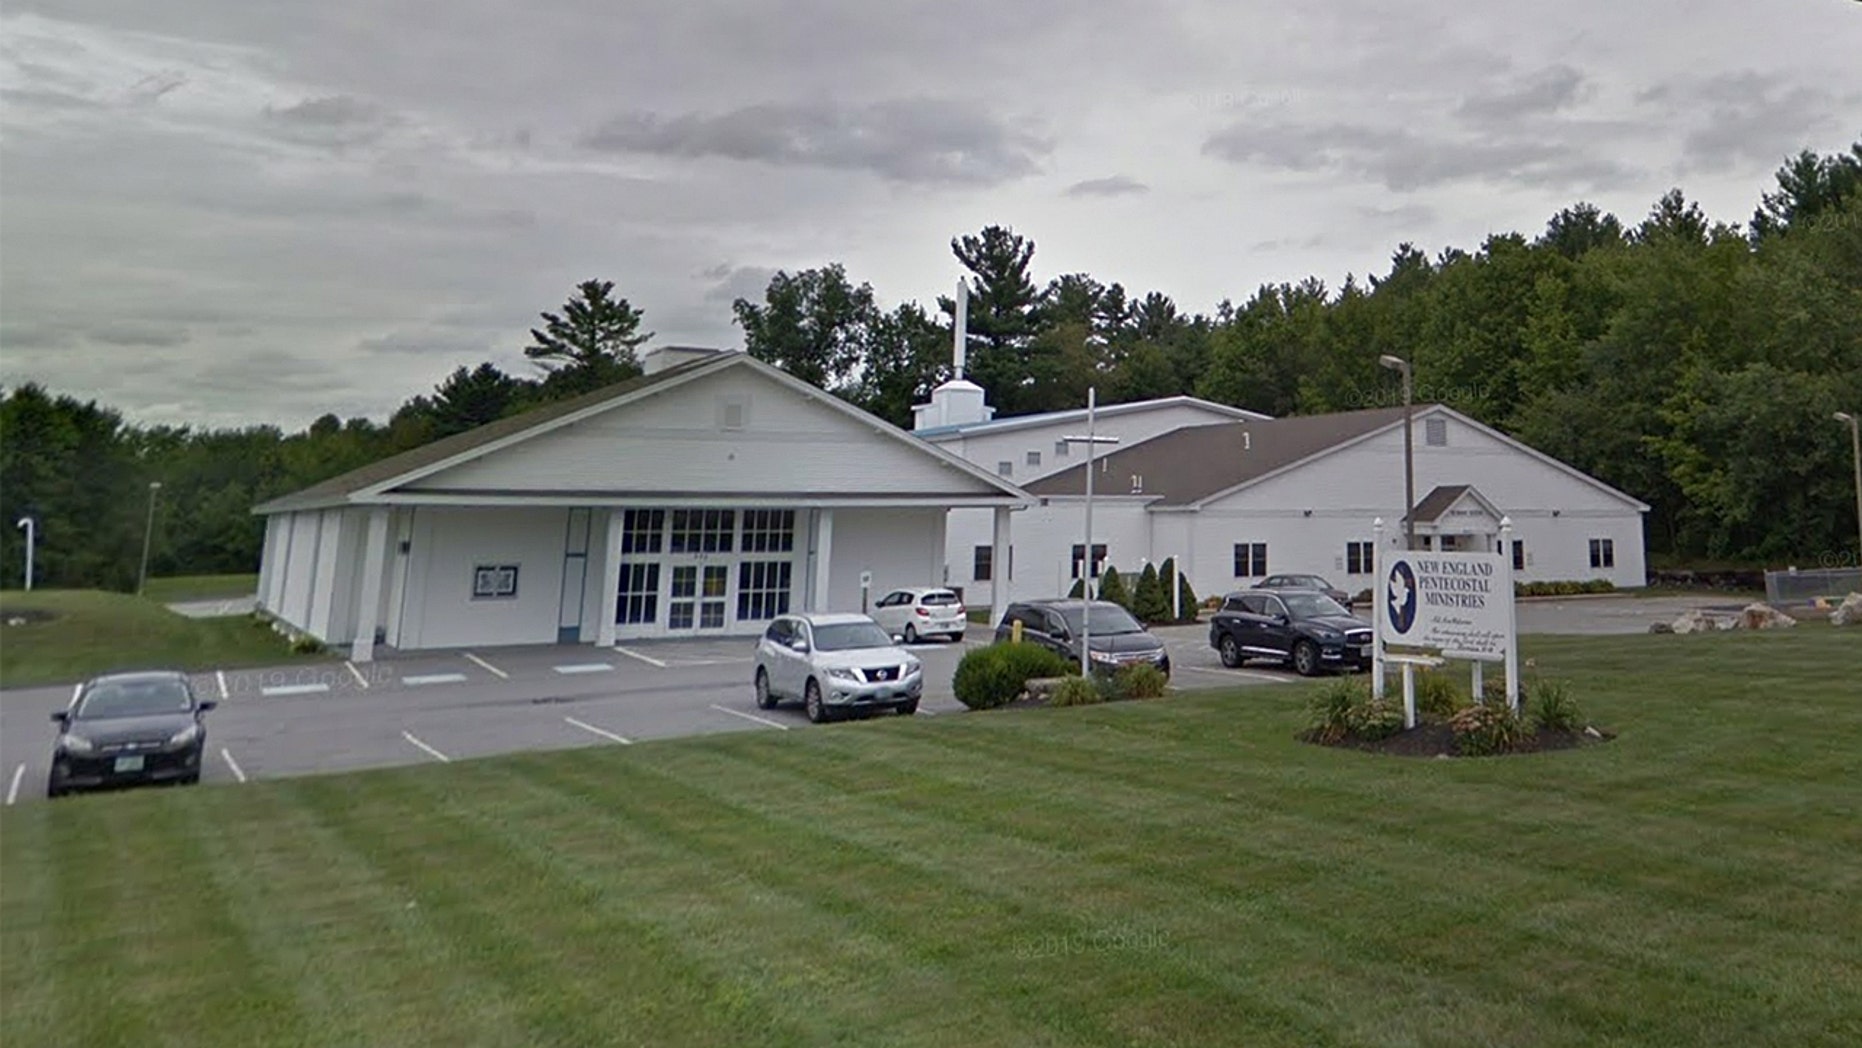 New Hampshire Wedding Shooting Leaves 2 Wounded Third Person Hurt